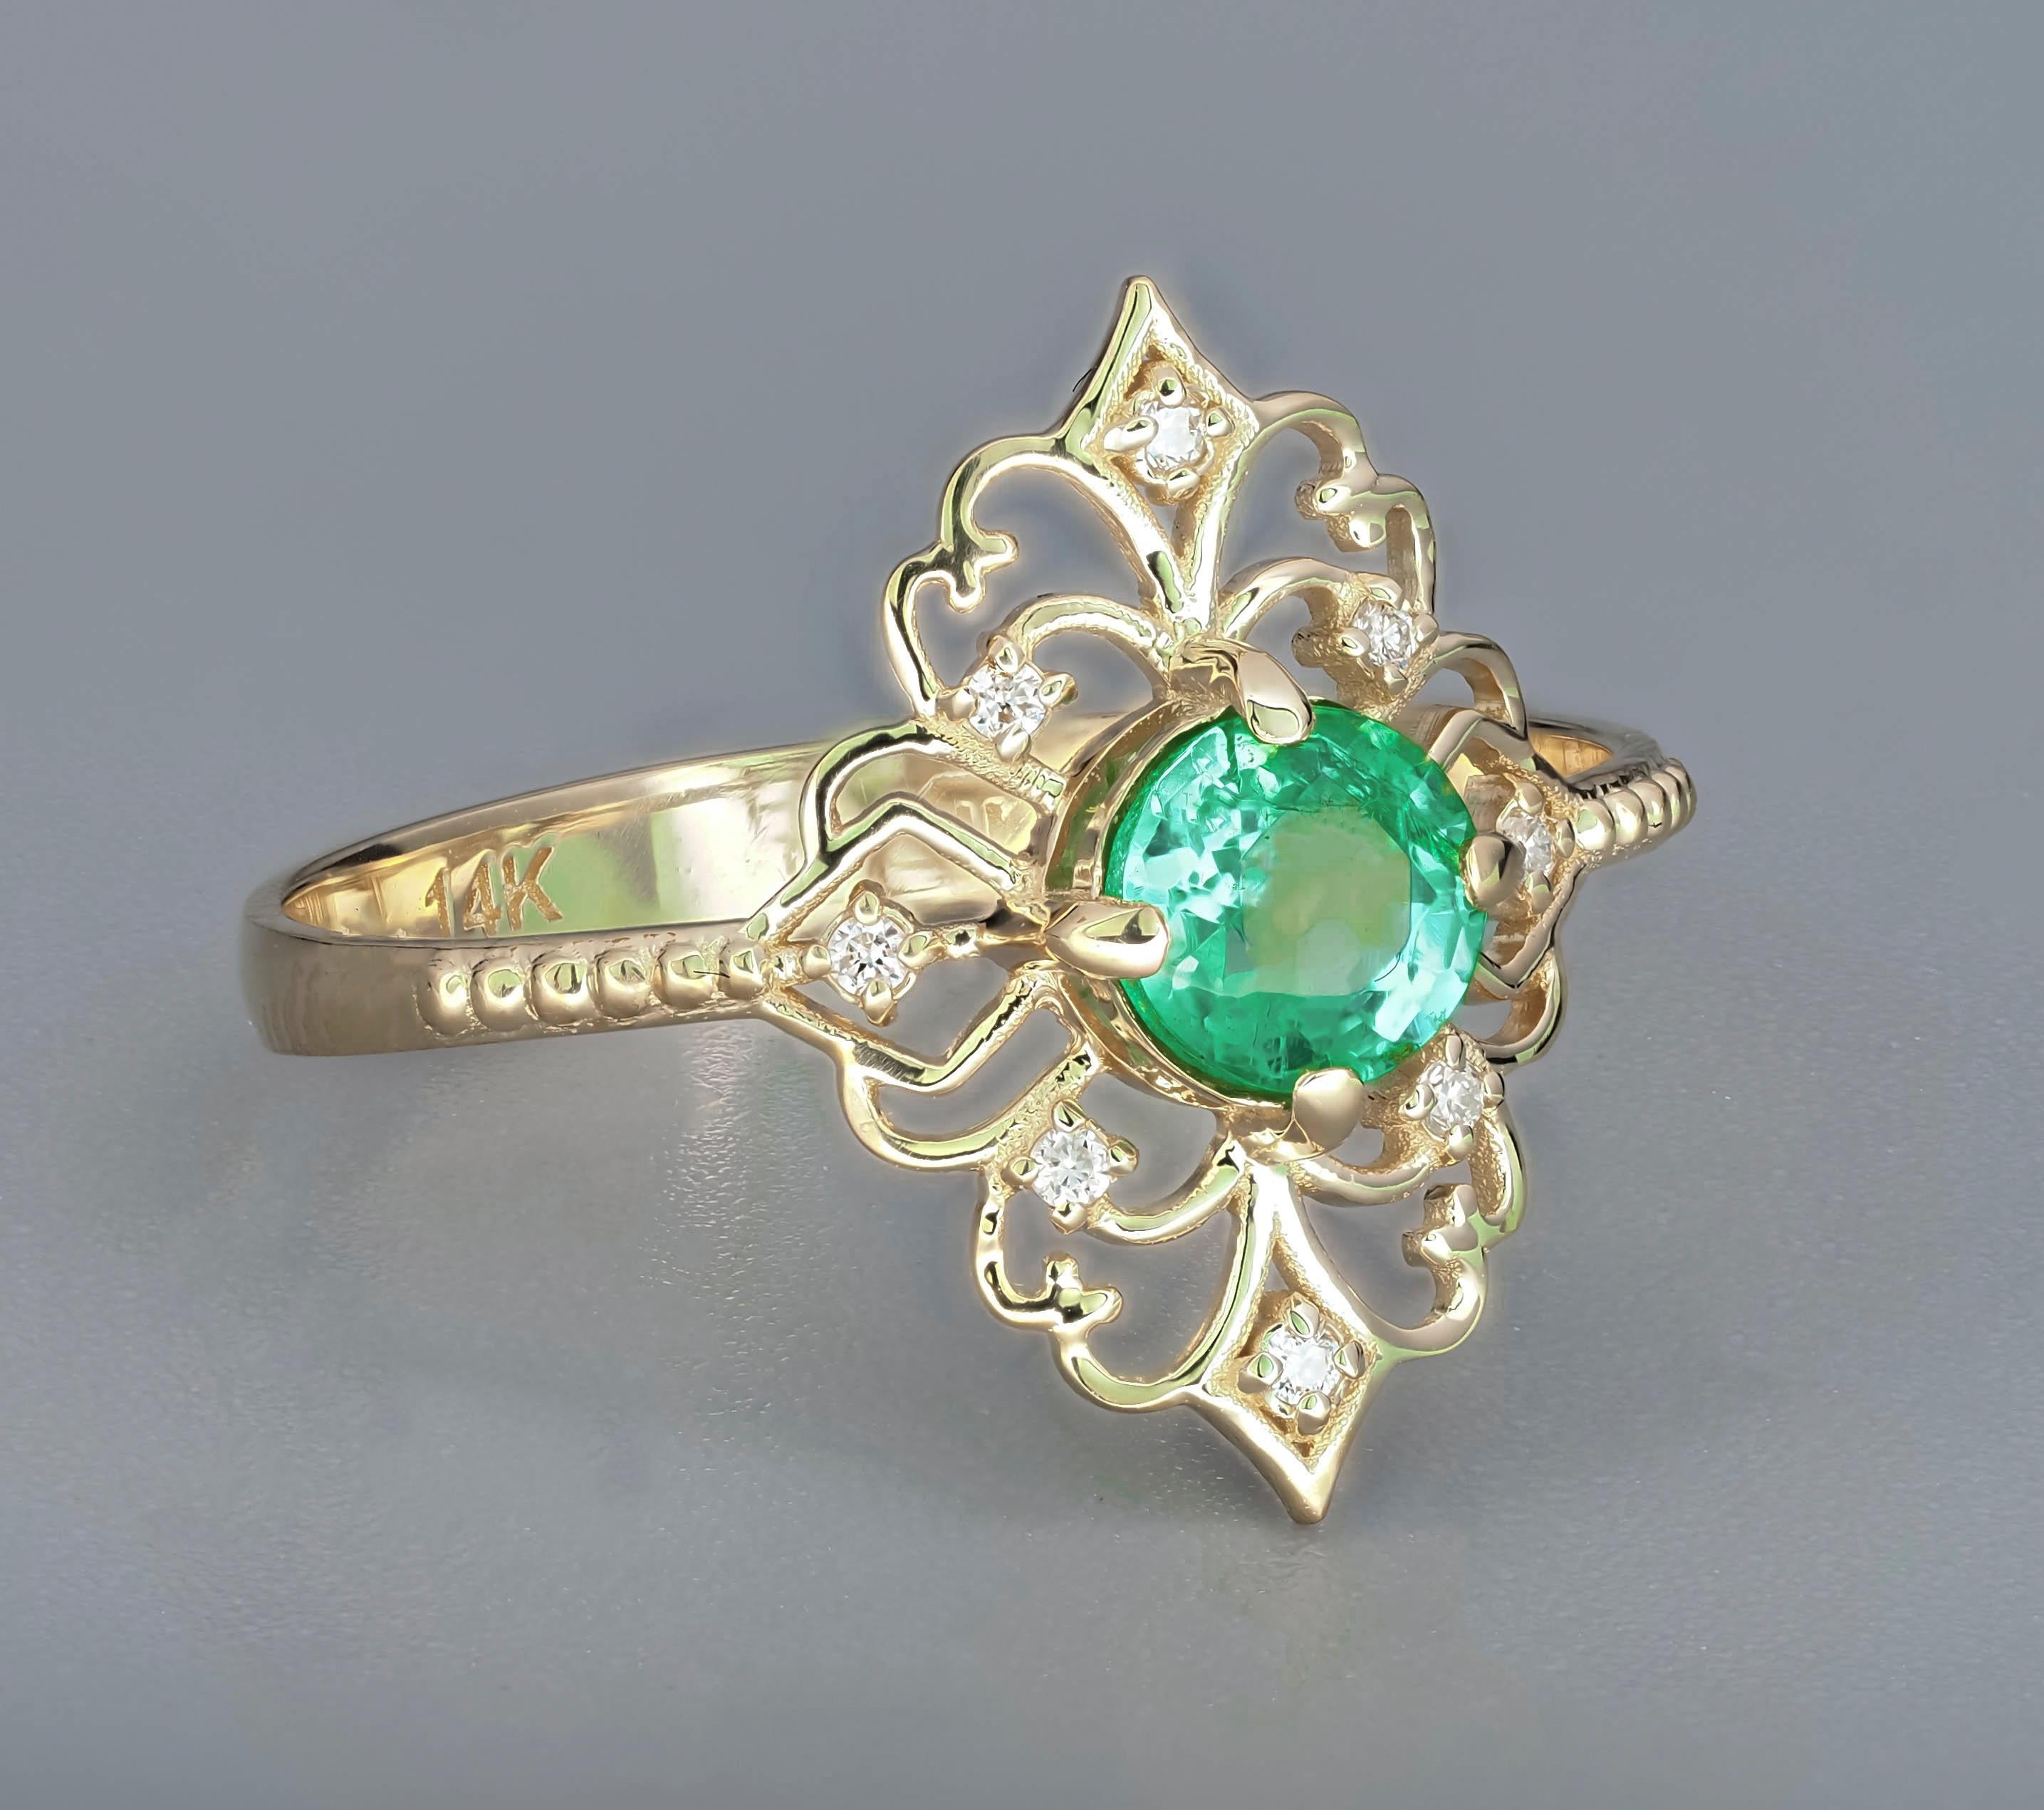 For Sale:  14 K Gold Ring with Emerald and Diamonds 17